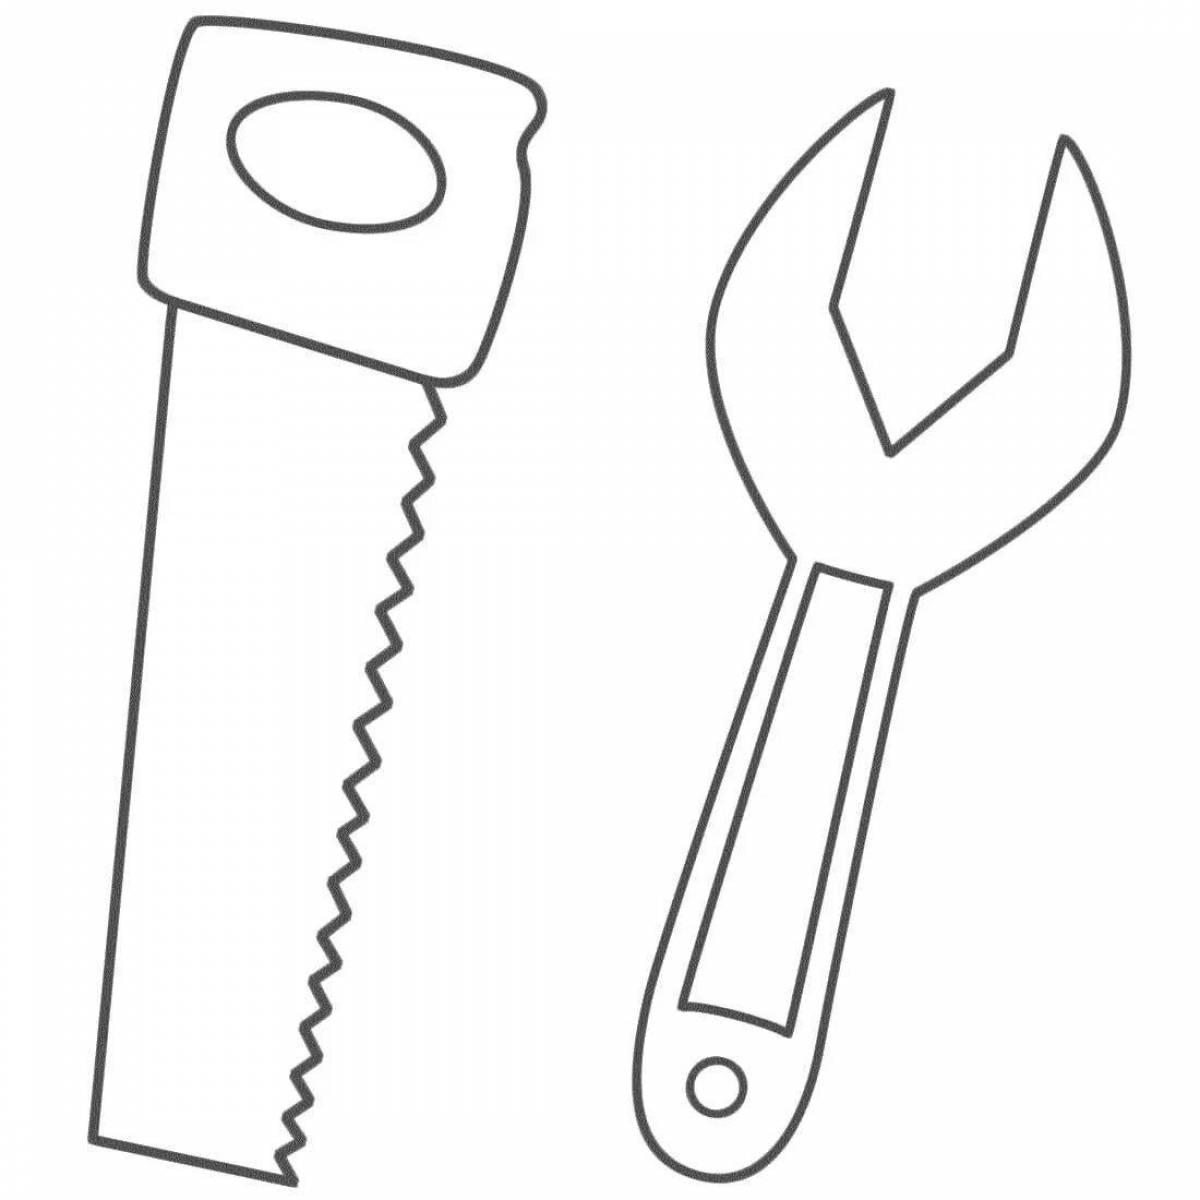 Sparkling Tools coloring page